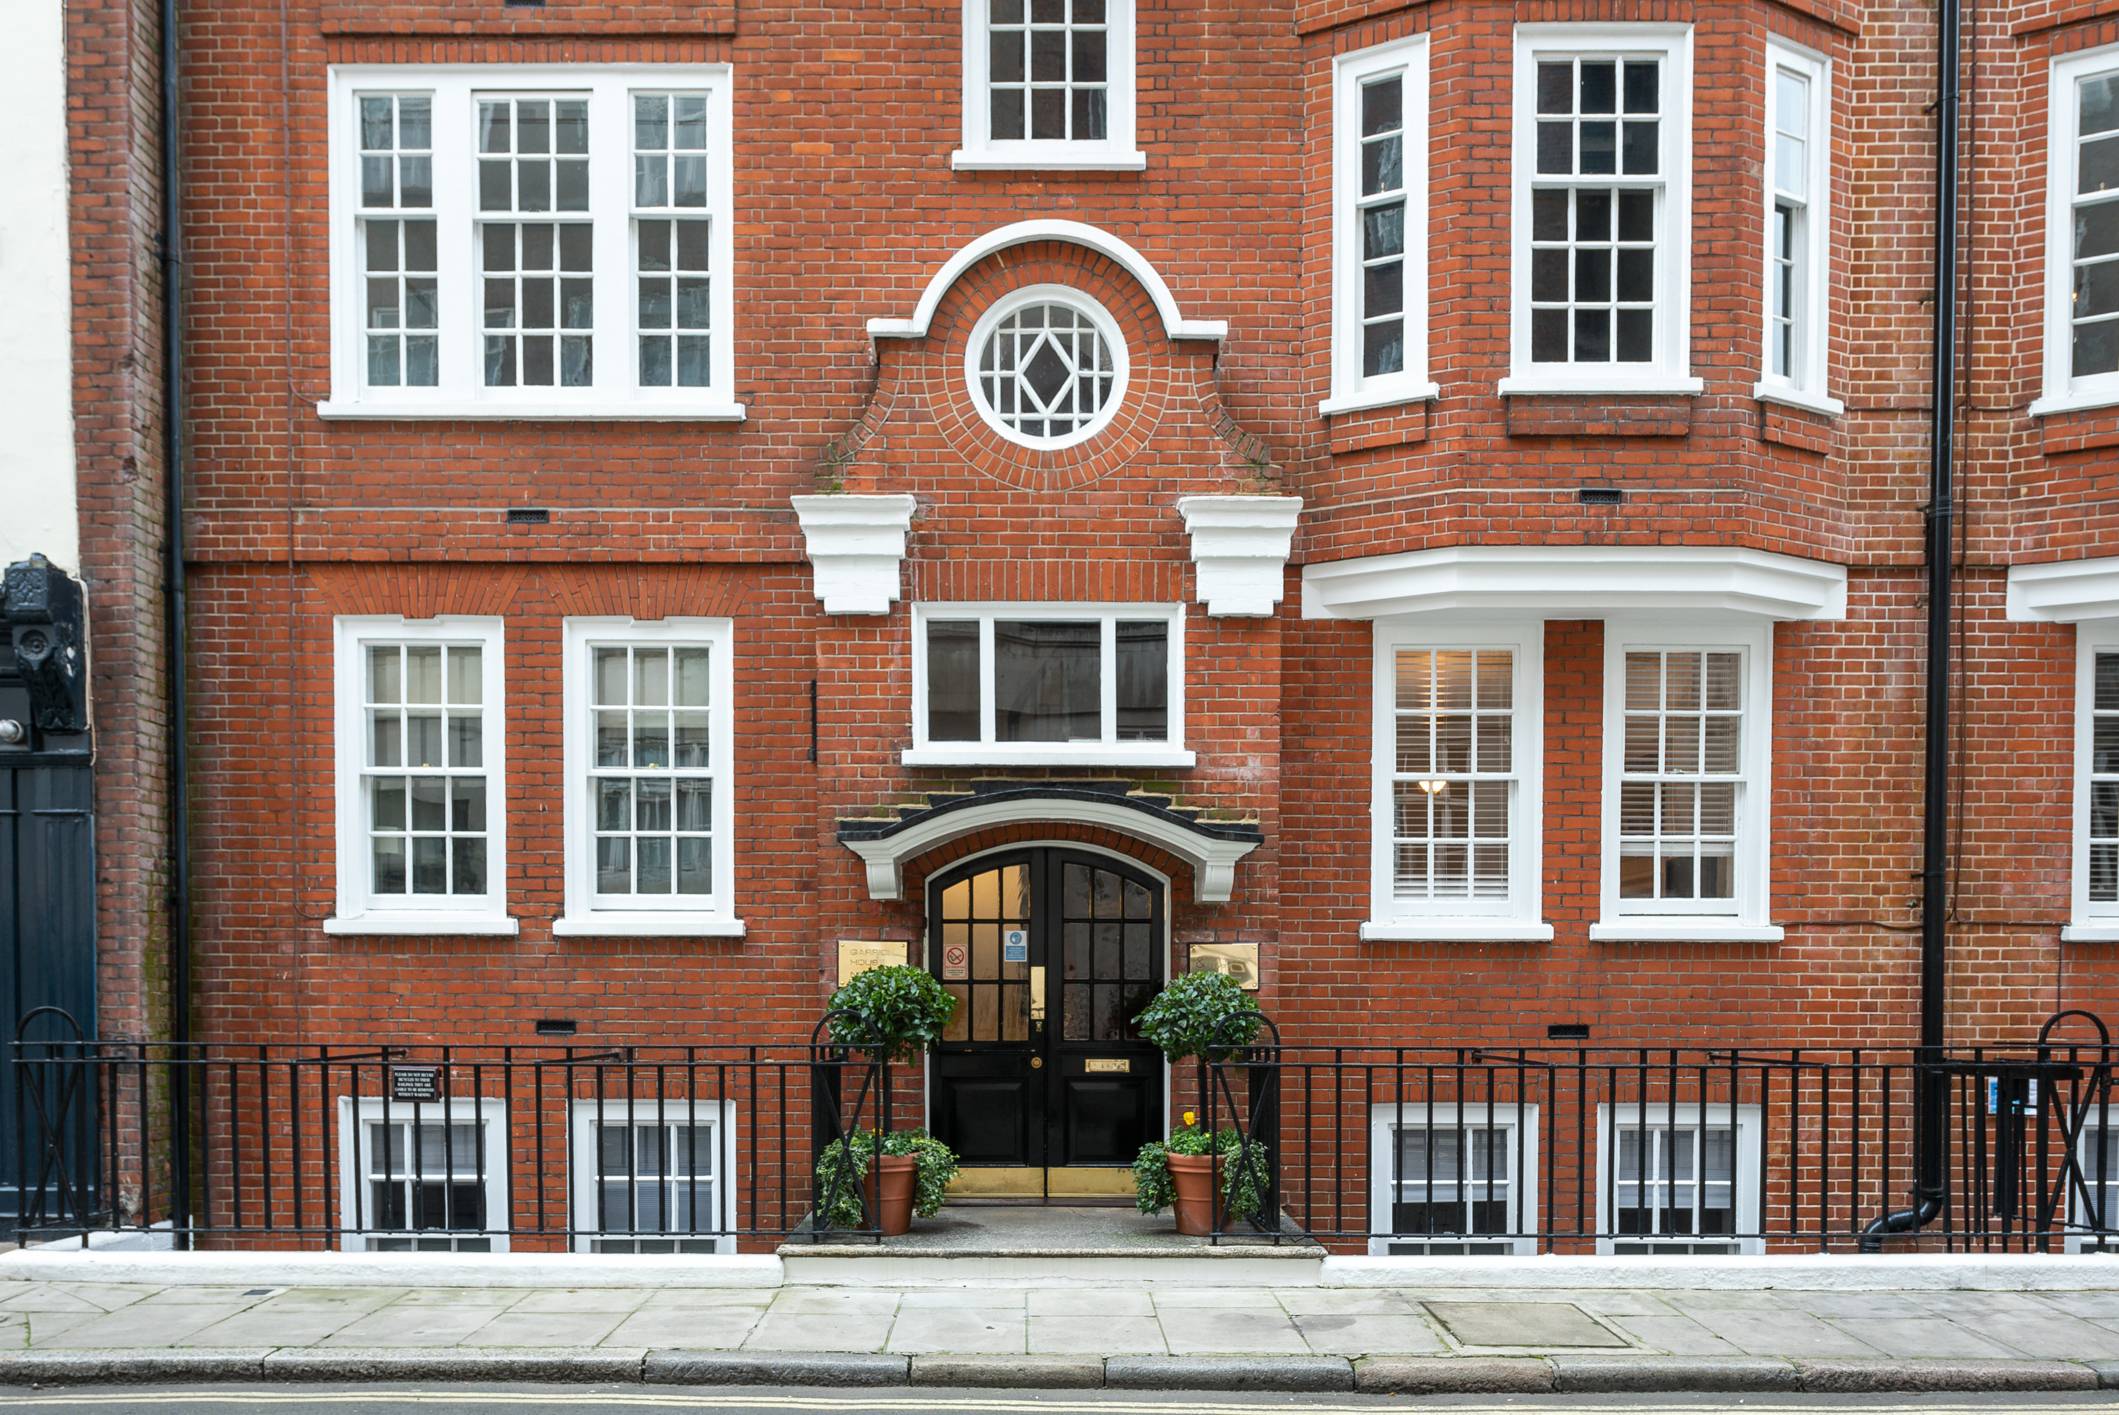 A Contemporary 1 Bedroom Apartment in the heart of Mayfair. This newly refurbished apartment is set on the top floor of an attractive red brick mansion block.